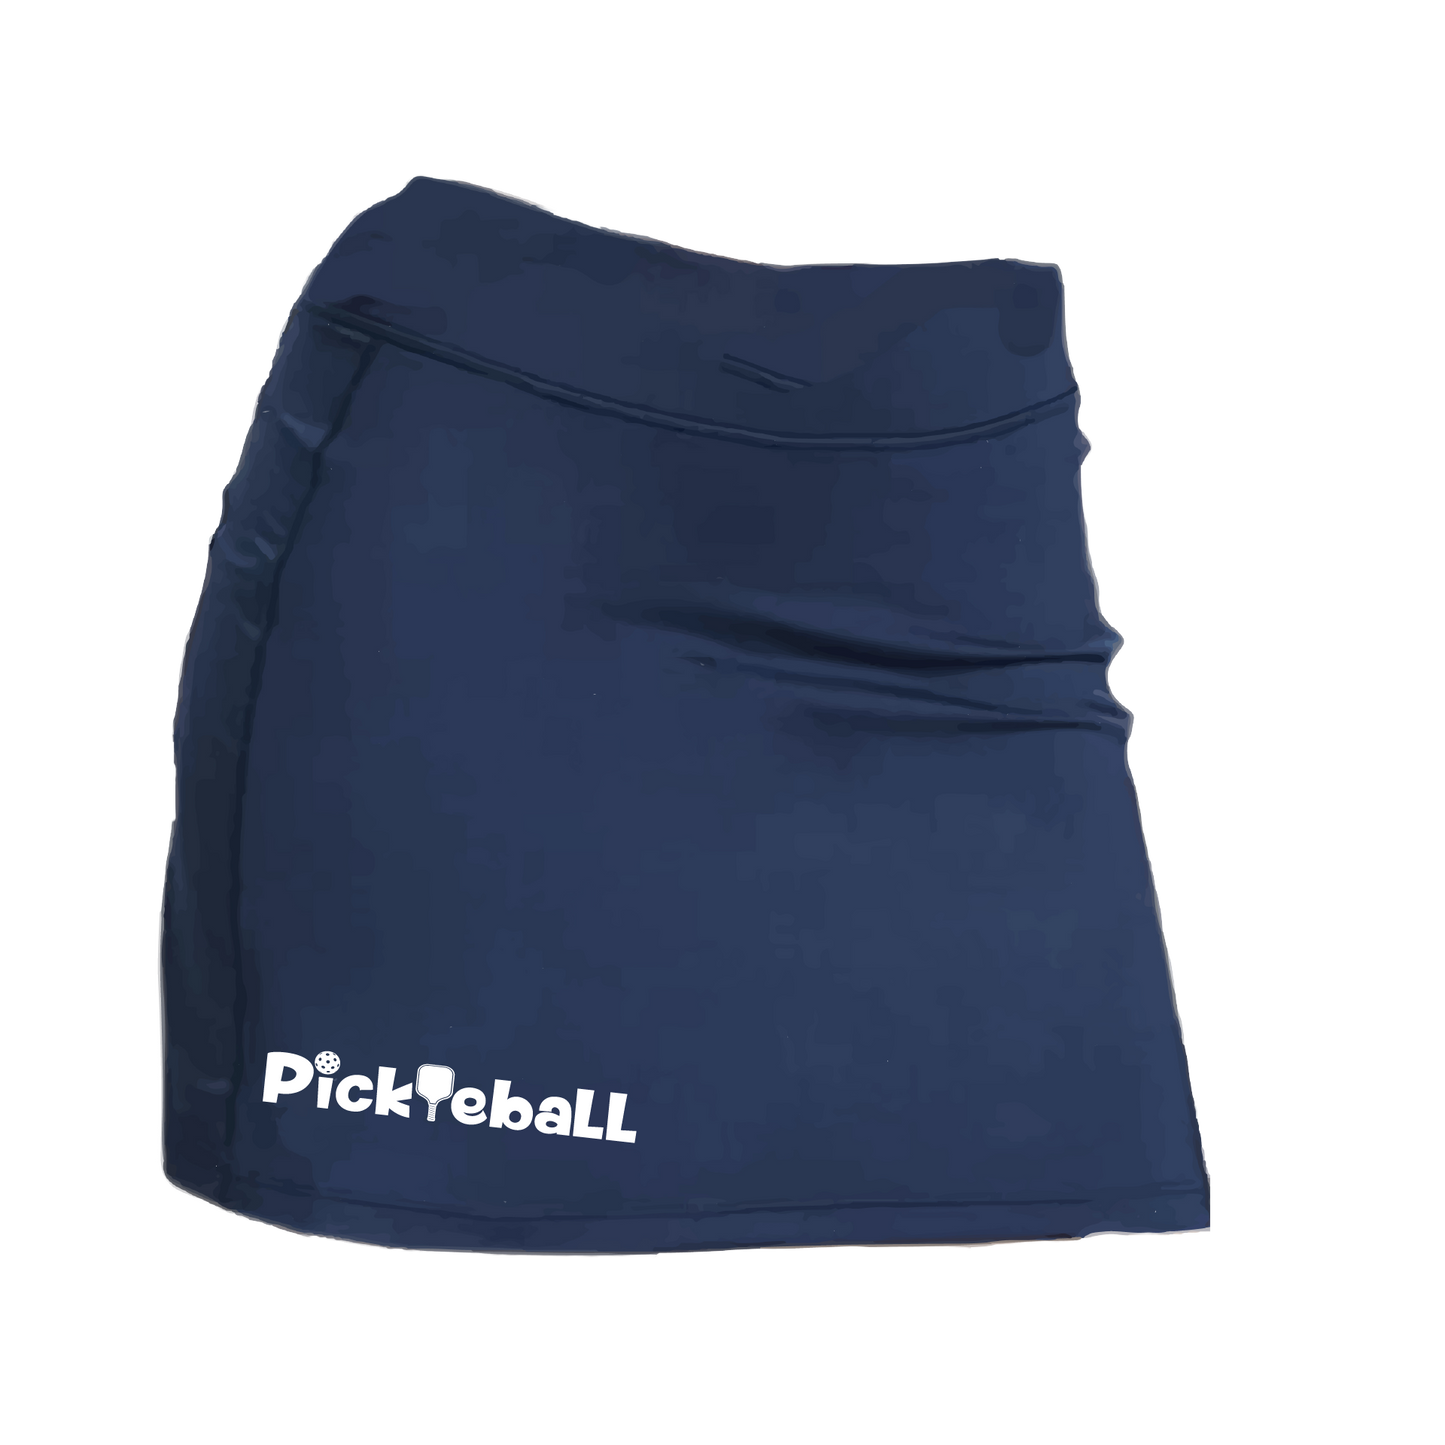 Pickleball Design: Pickleball Horizontal  Women’s core active jersey-knit skort comes with built-in shorts made out of a poly-spandex blend that will keep your legs from rubbing together, without which often results in painful chafing. You can also feel secure knowing that no matter how strenuous the exercise, the skort will remain in place (it won’t ride up!). The fabric is breathable, featuring Dri-Works wicking technology